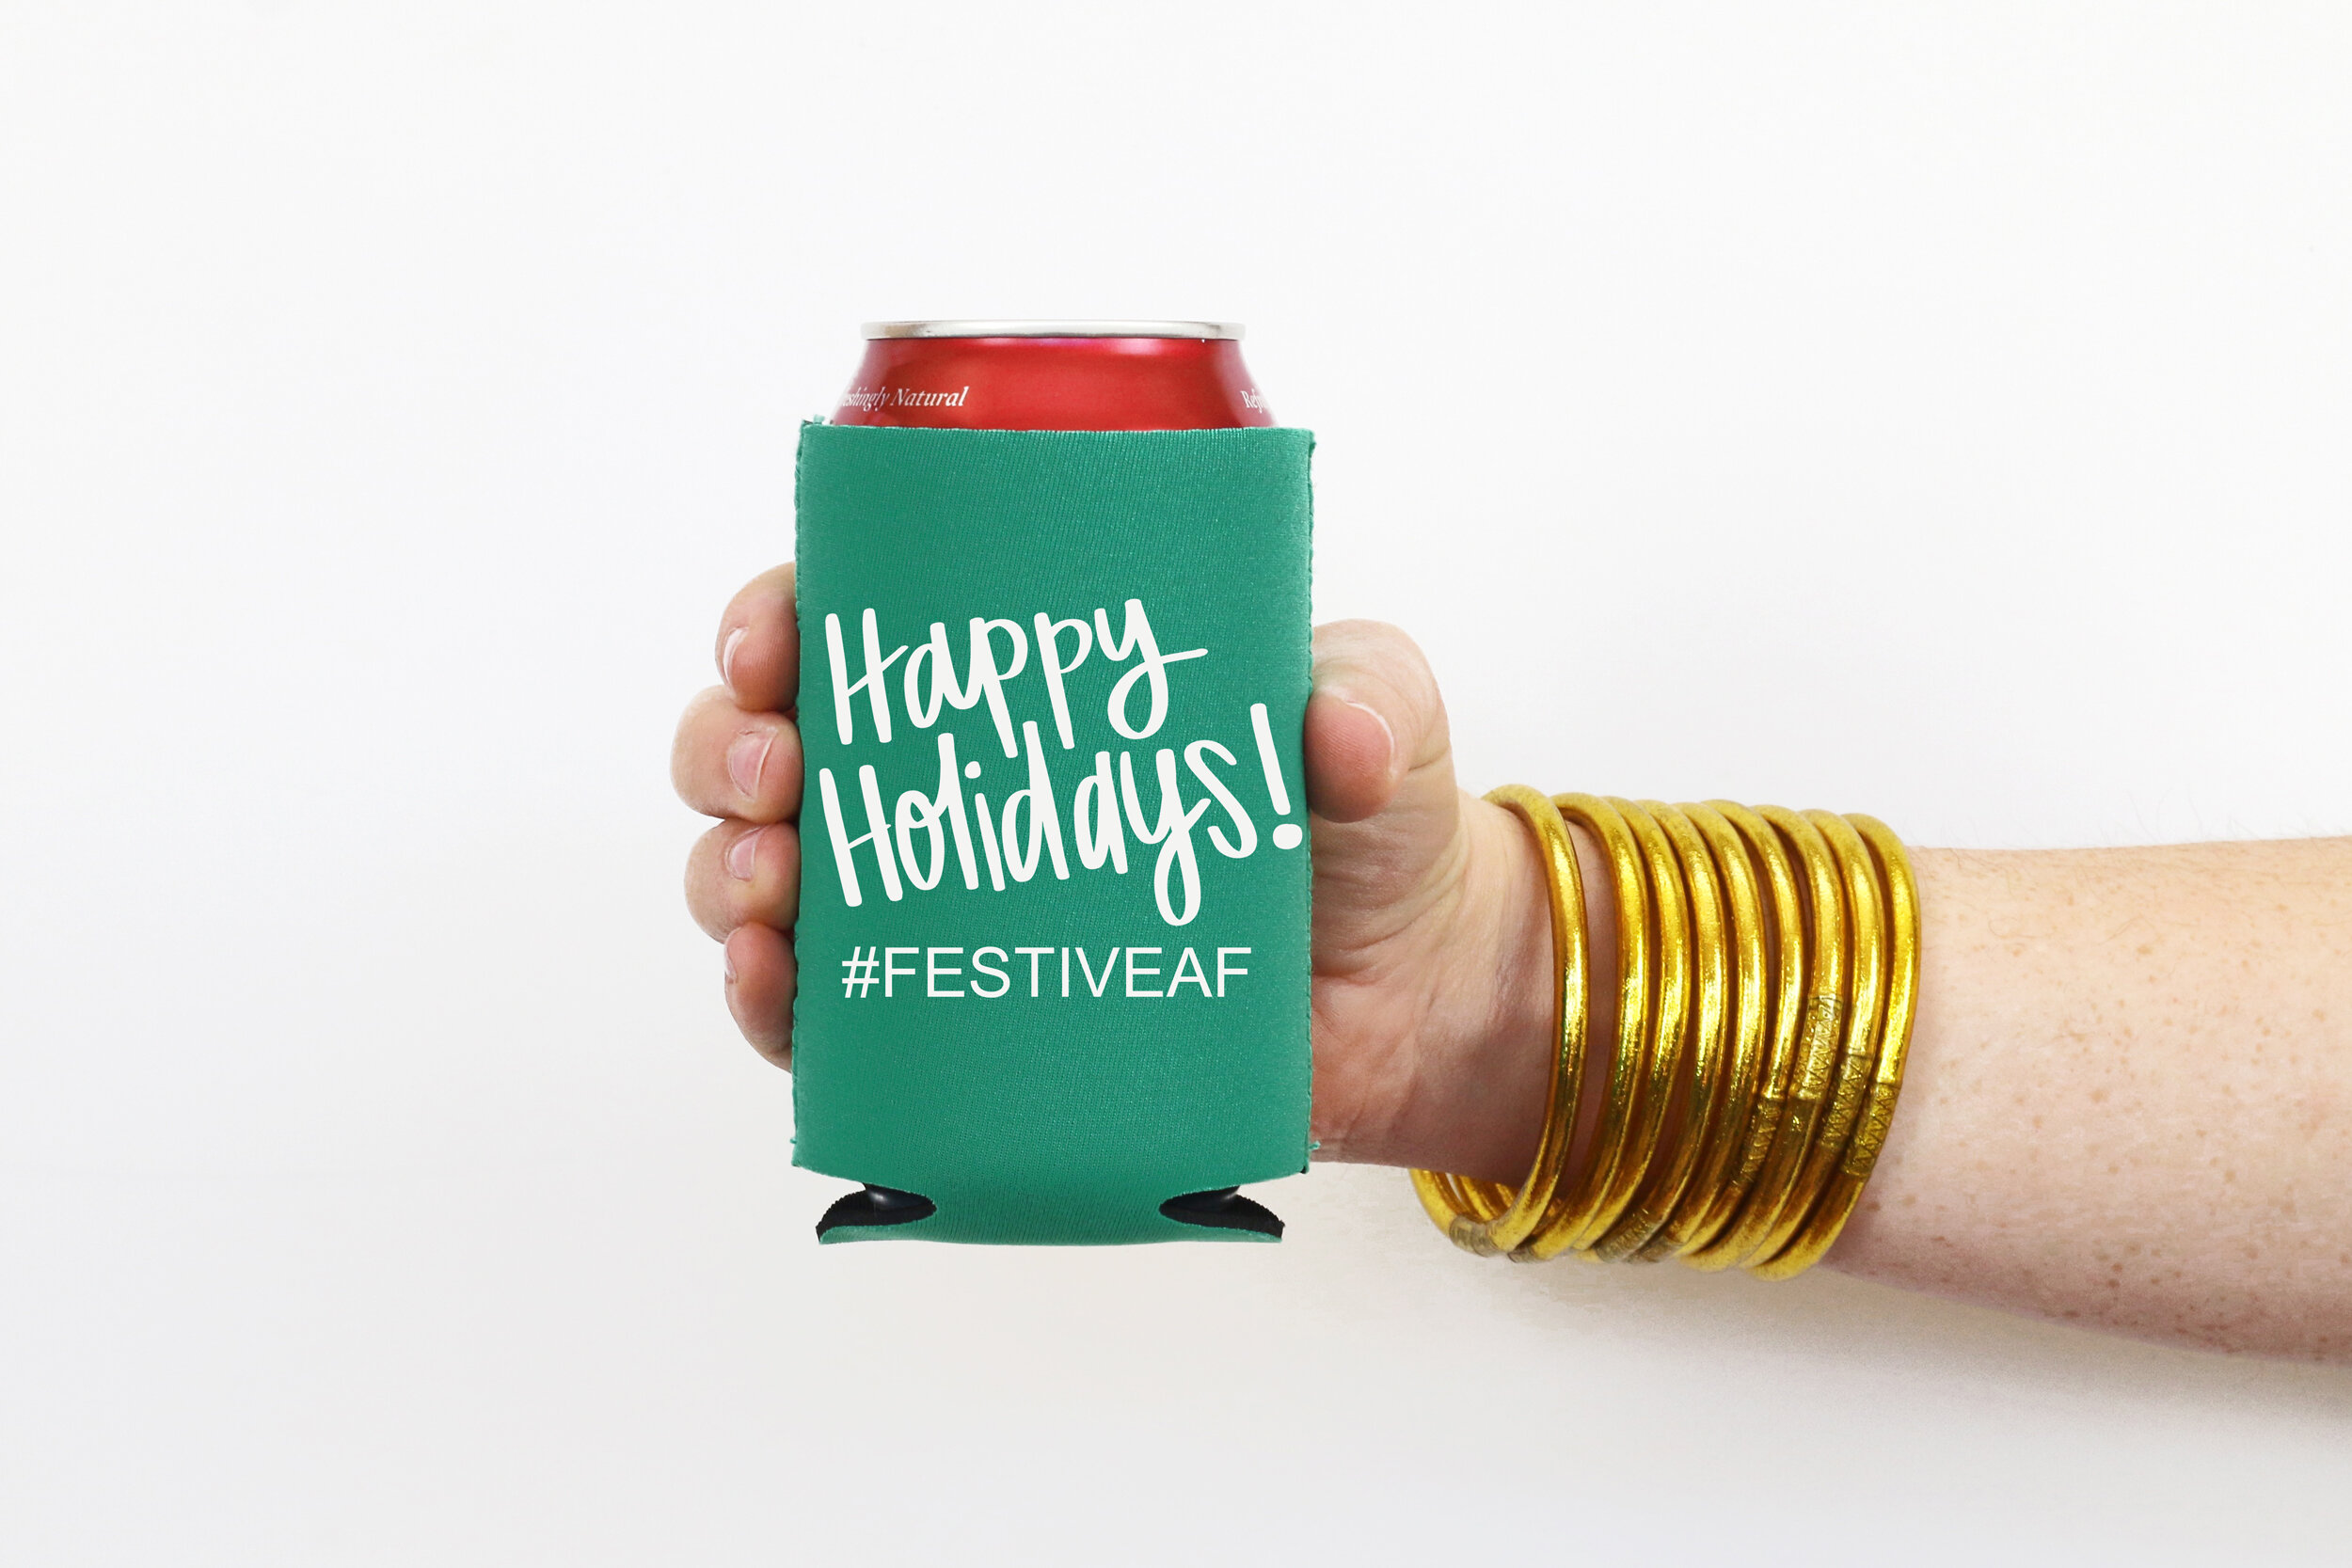 https://images.squarespace-cdn.com/content/v1/570446562fe131860c1d9db1/1614889287882-FU6R6AH39RYK25ZCGS85/holiday-party-favors-coozies.jpg?format=2500w